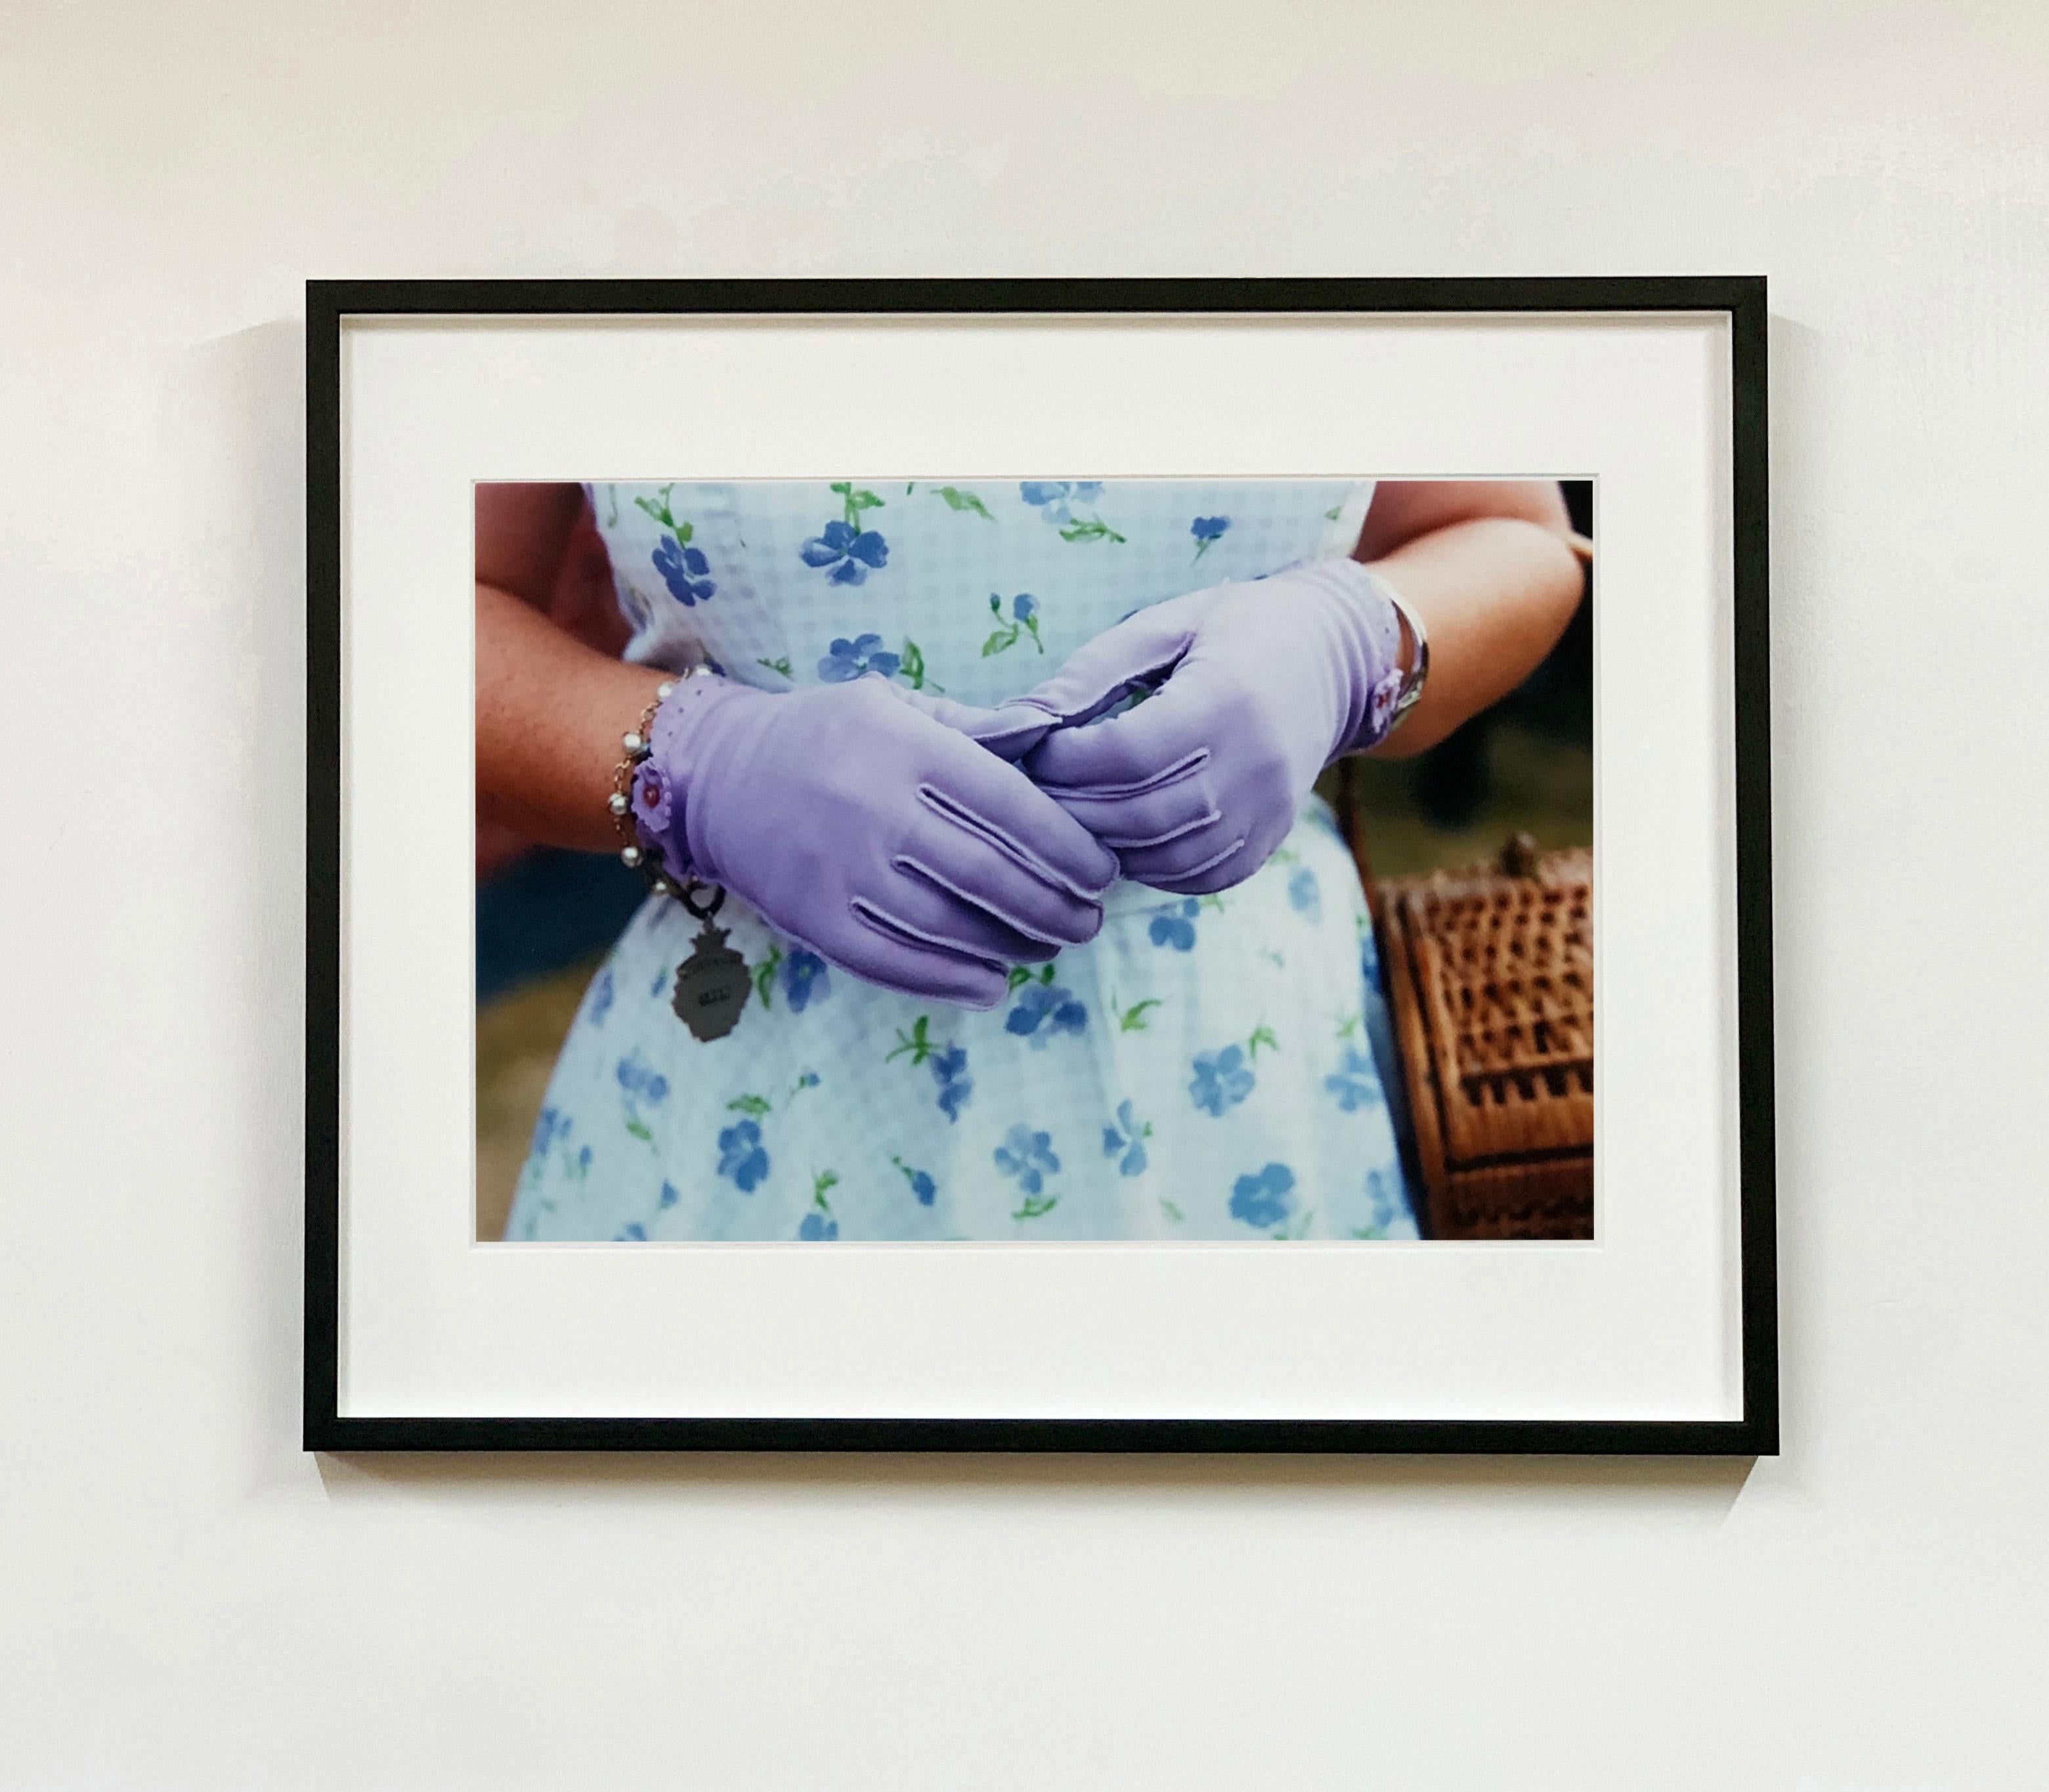 Lilac Gloves, Goodwood, Chichester - Feminine fashion, color photography - Photograph by Richard Heeps